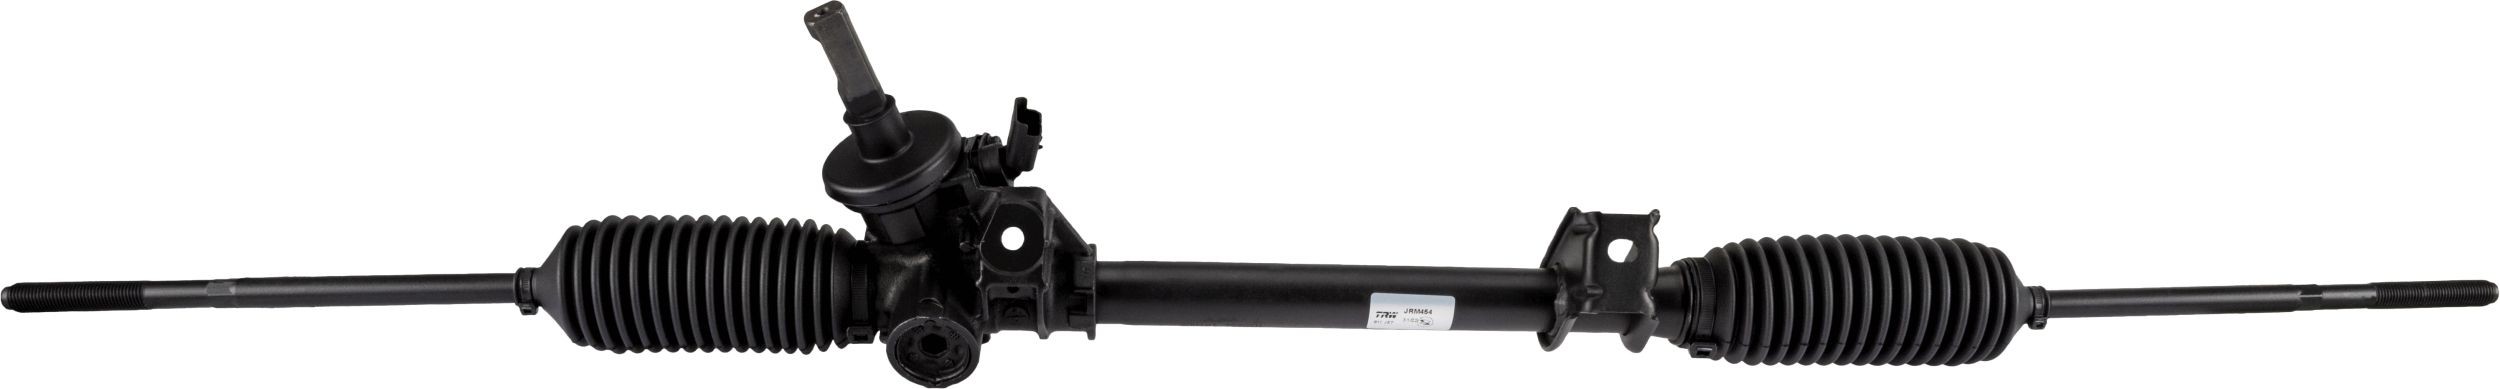 JRM454 TRW Power steering rack MITSUBISHI Mechanical, for left-hand drive vehicles, untoothed, 1110 mm